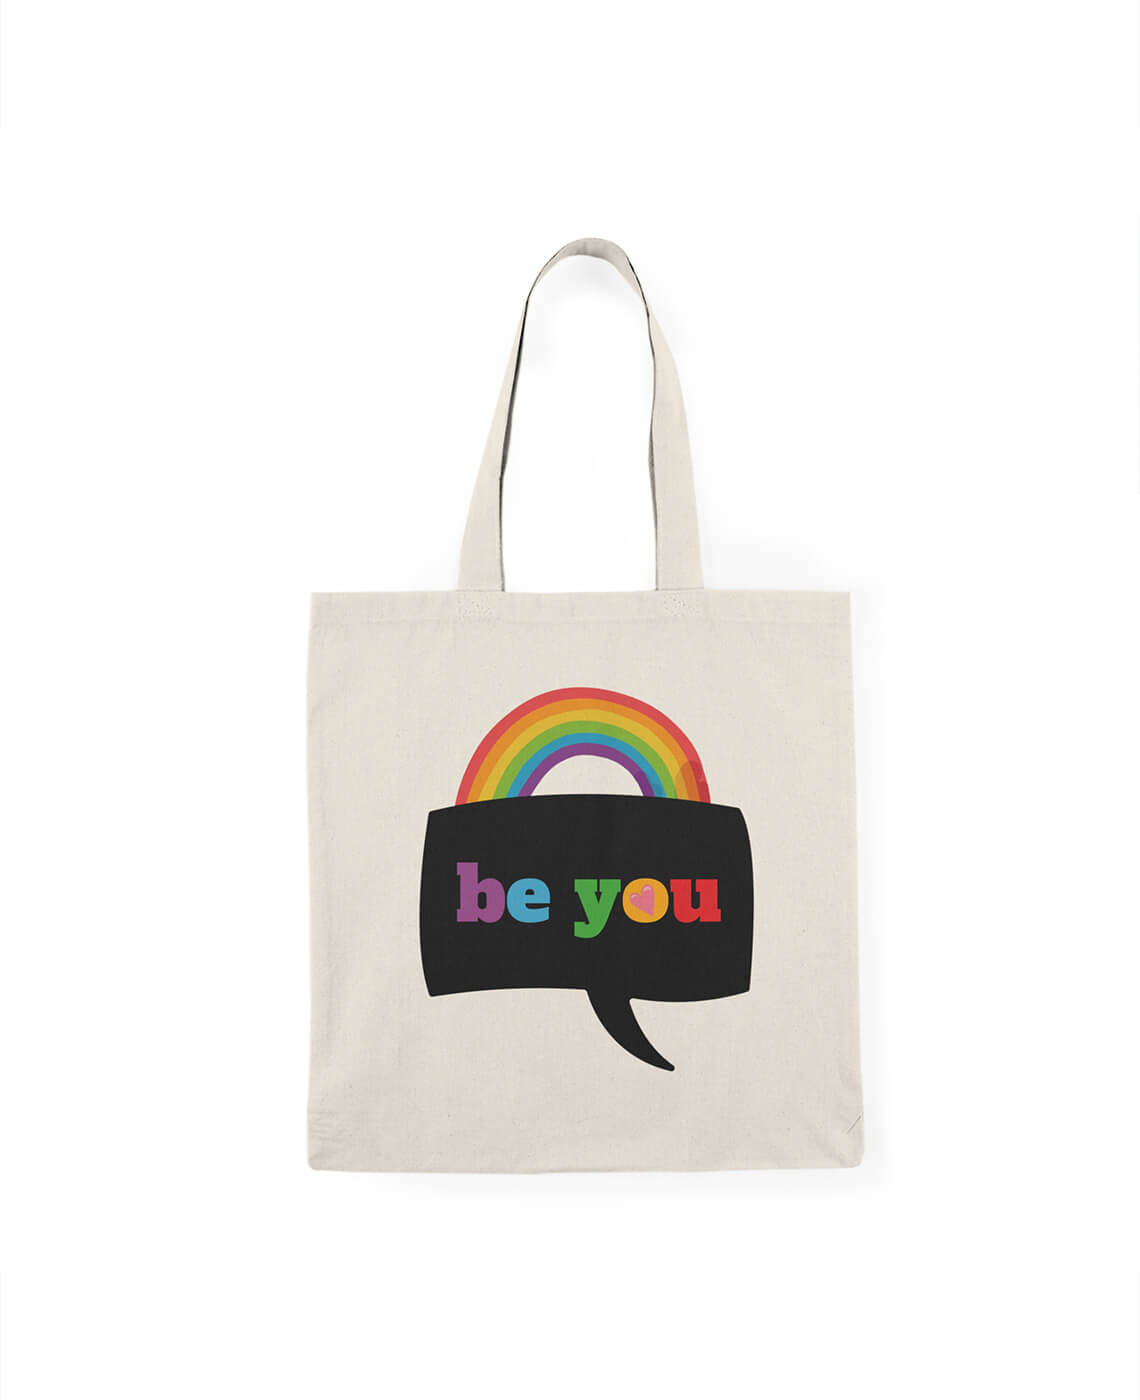 Be you Canvas Tote Bag One7 Store Canada (2)